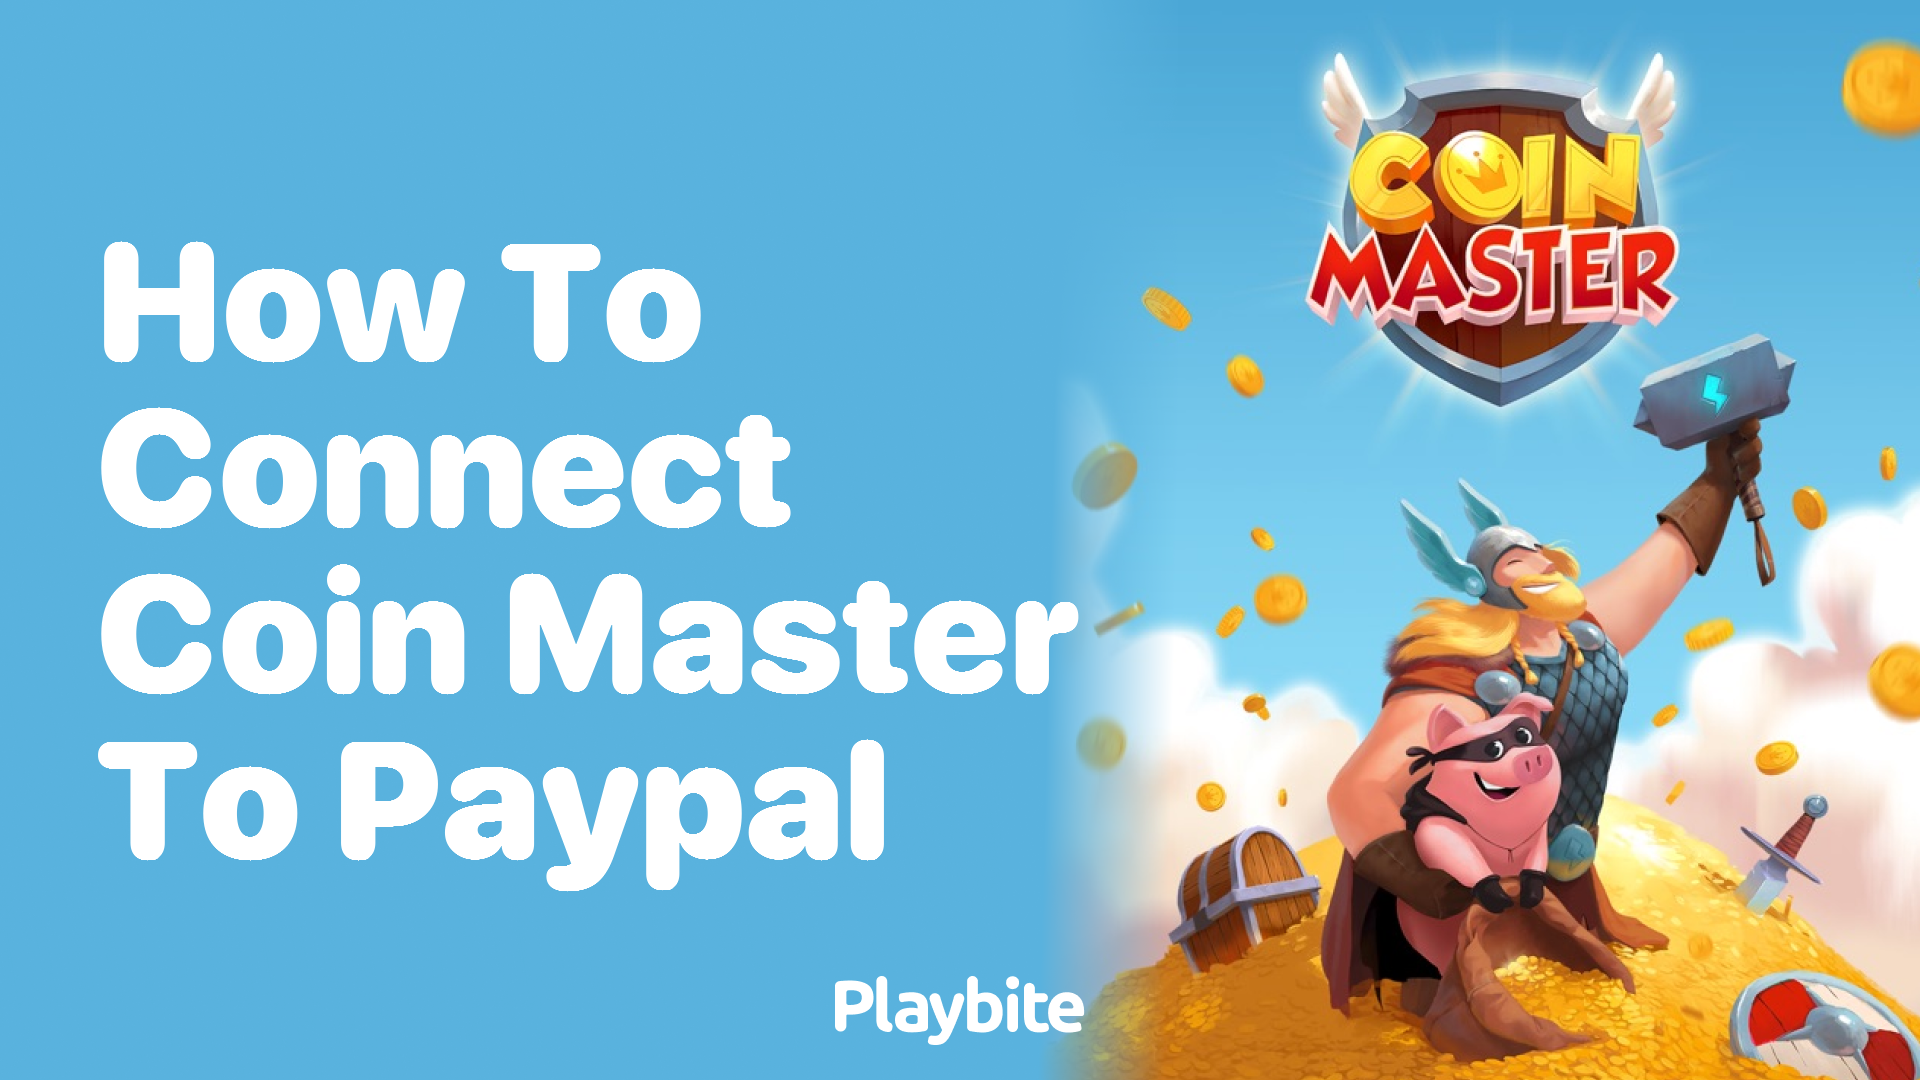 How to Connect Coin Master to PayPal: What You Need to Know